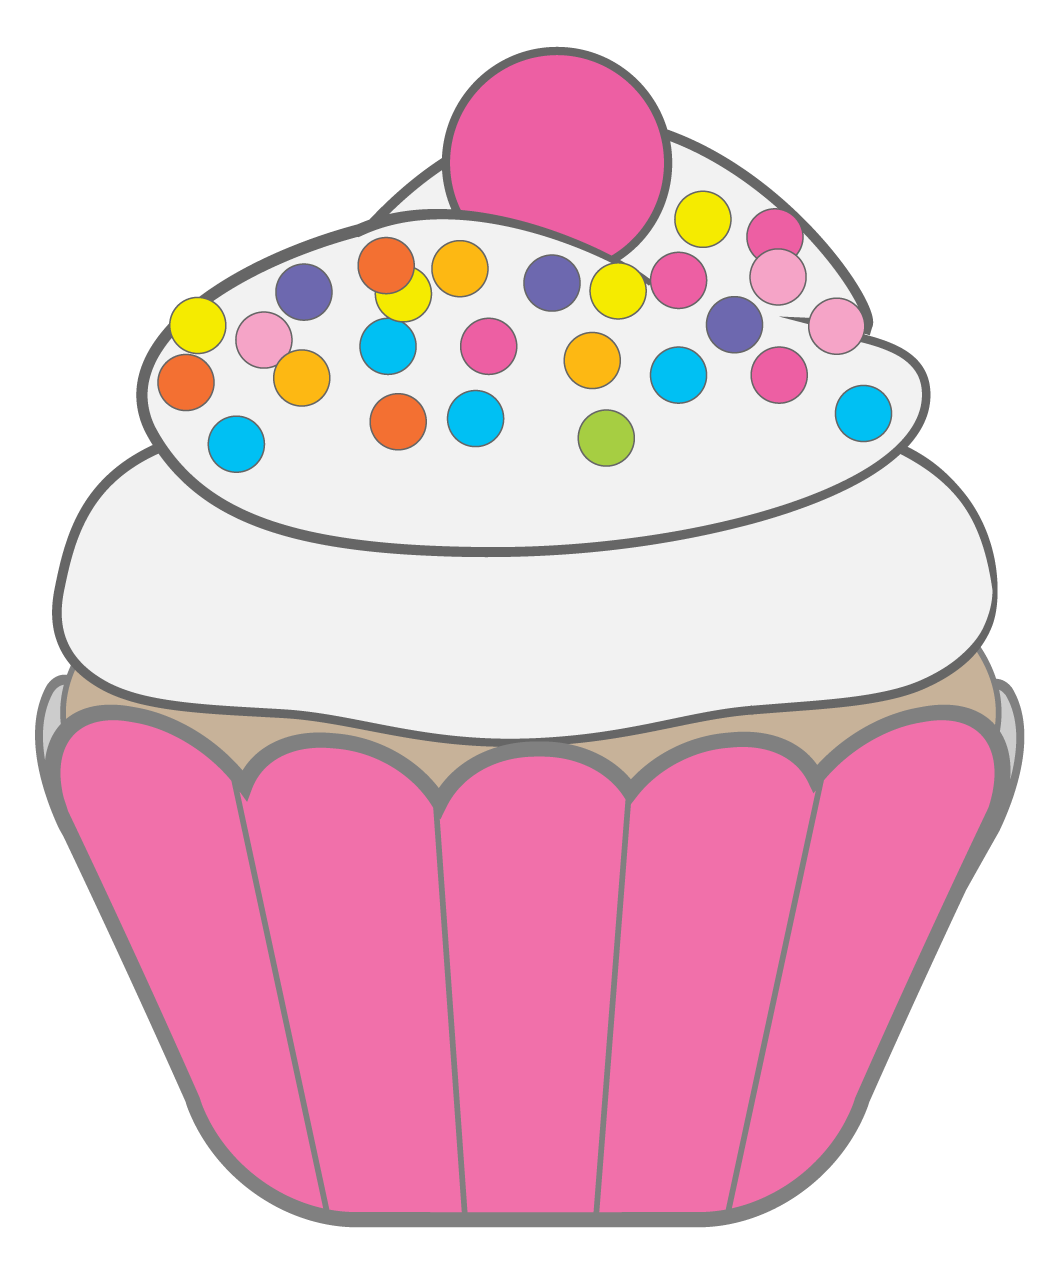 Design clipart cupcake. Cupcakes muffins by carol